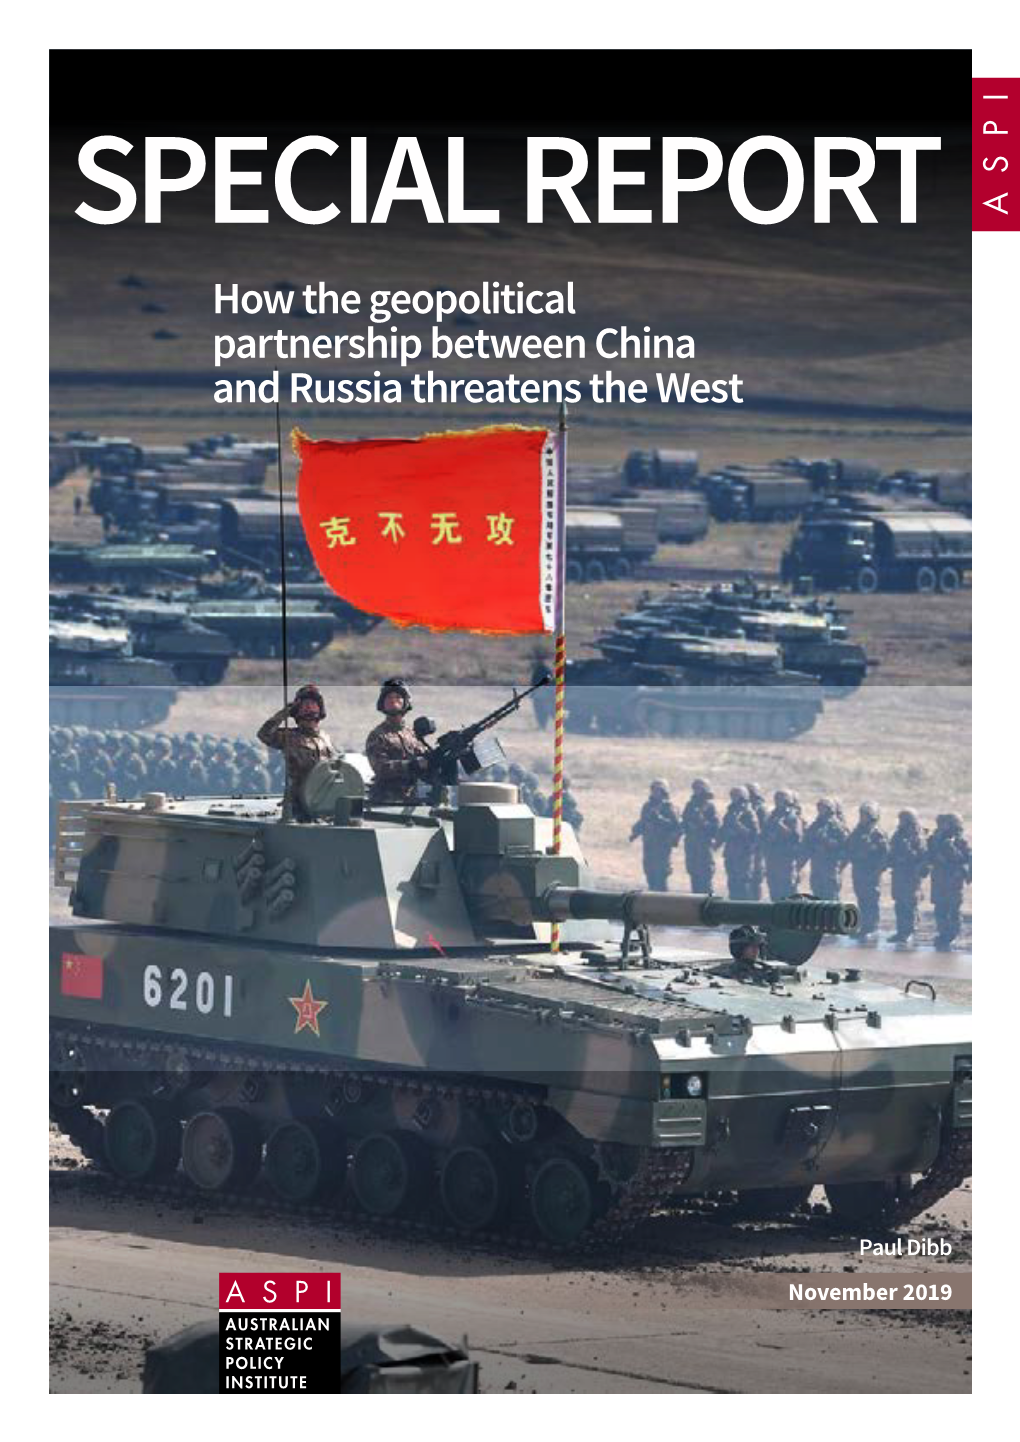 How the Geopolitical Partnership Between China and Russia Threatens the West